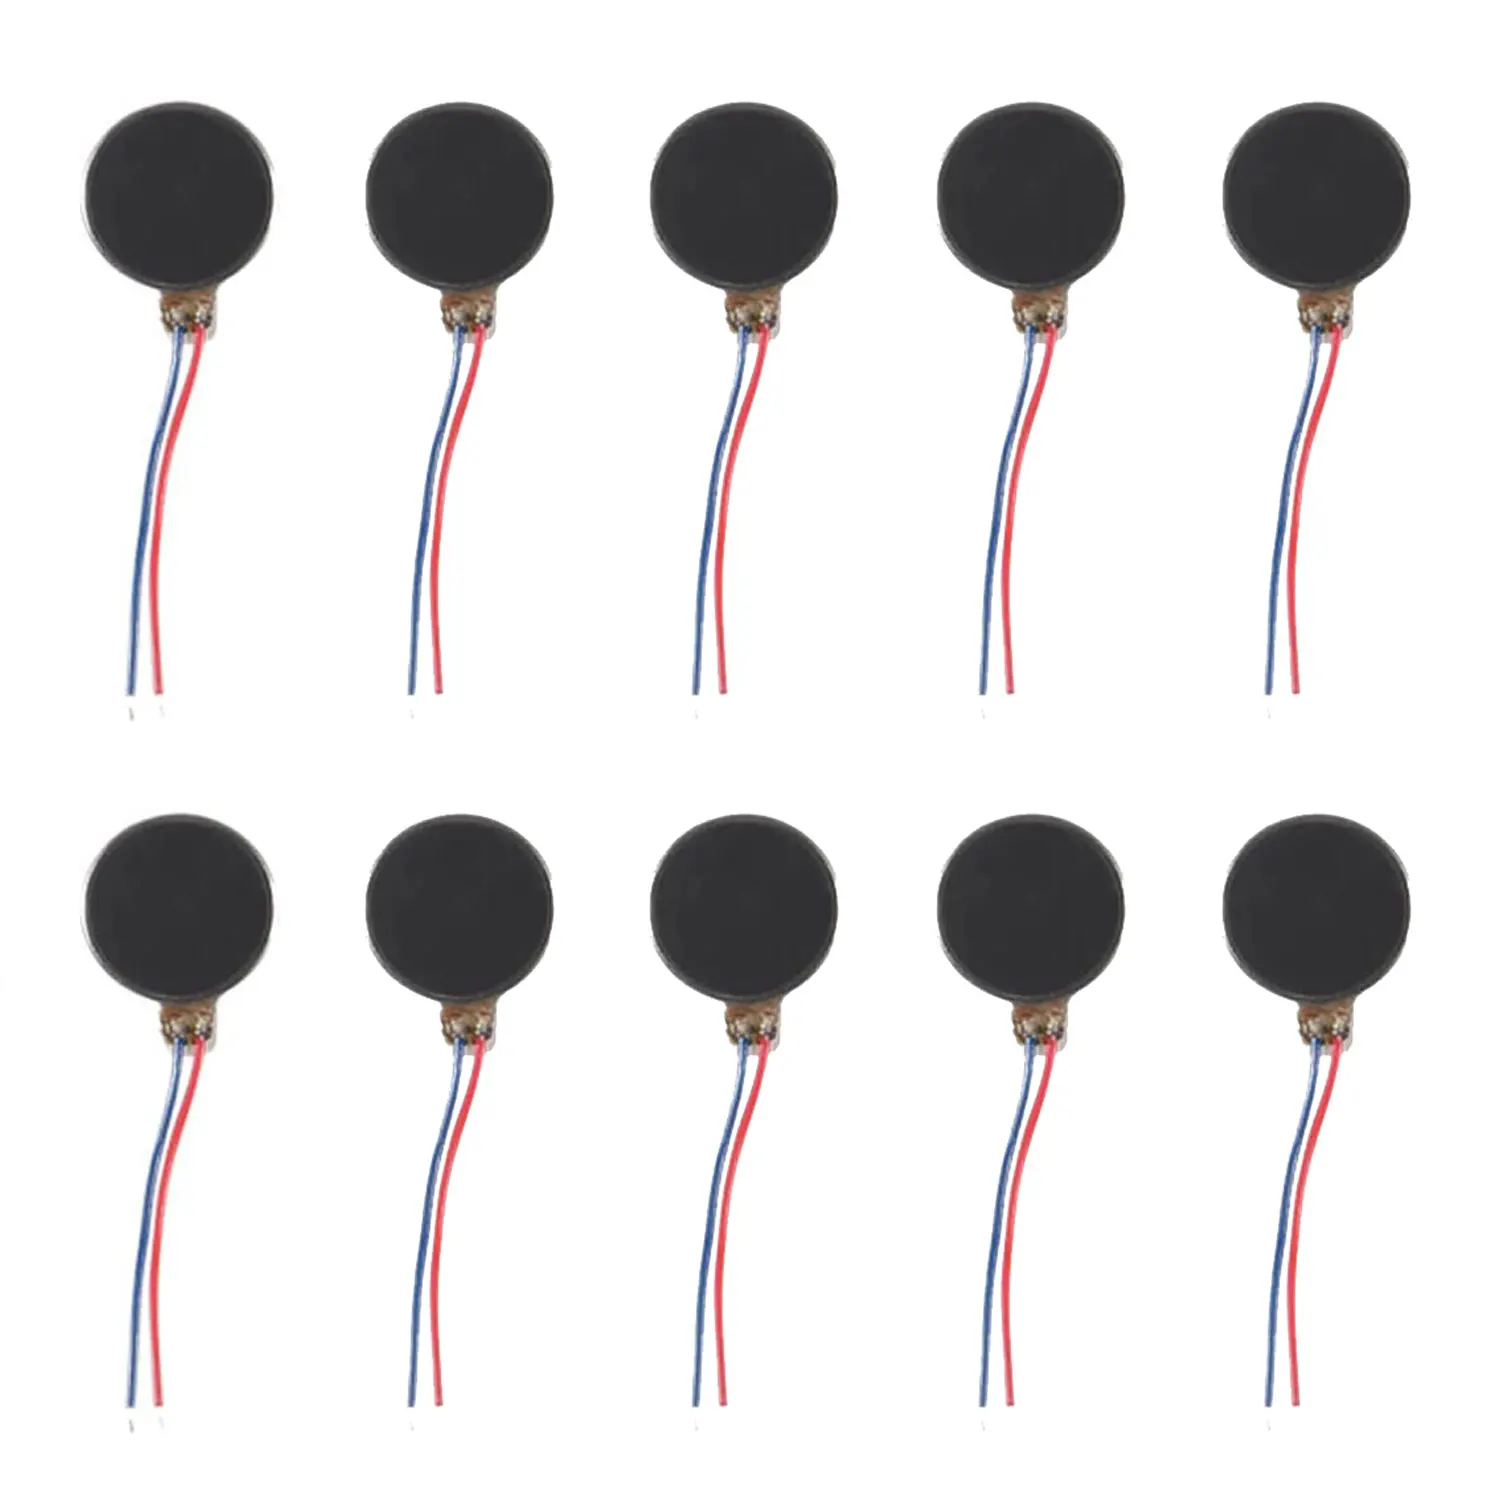 

10pcs 10mmx3mm Mini Vibration Motors DC 3V 12000RPM Self Adhesive Flat Coin-Button Motors for Mobile Cell Phone Pager Tablet